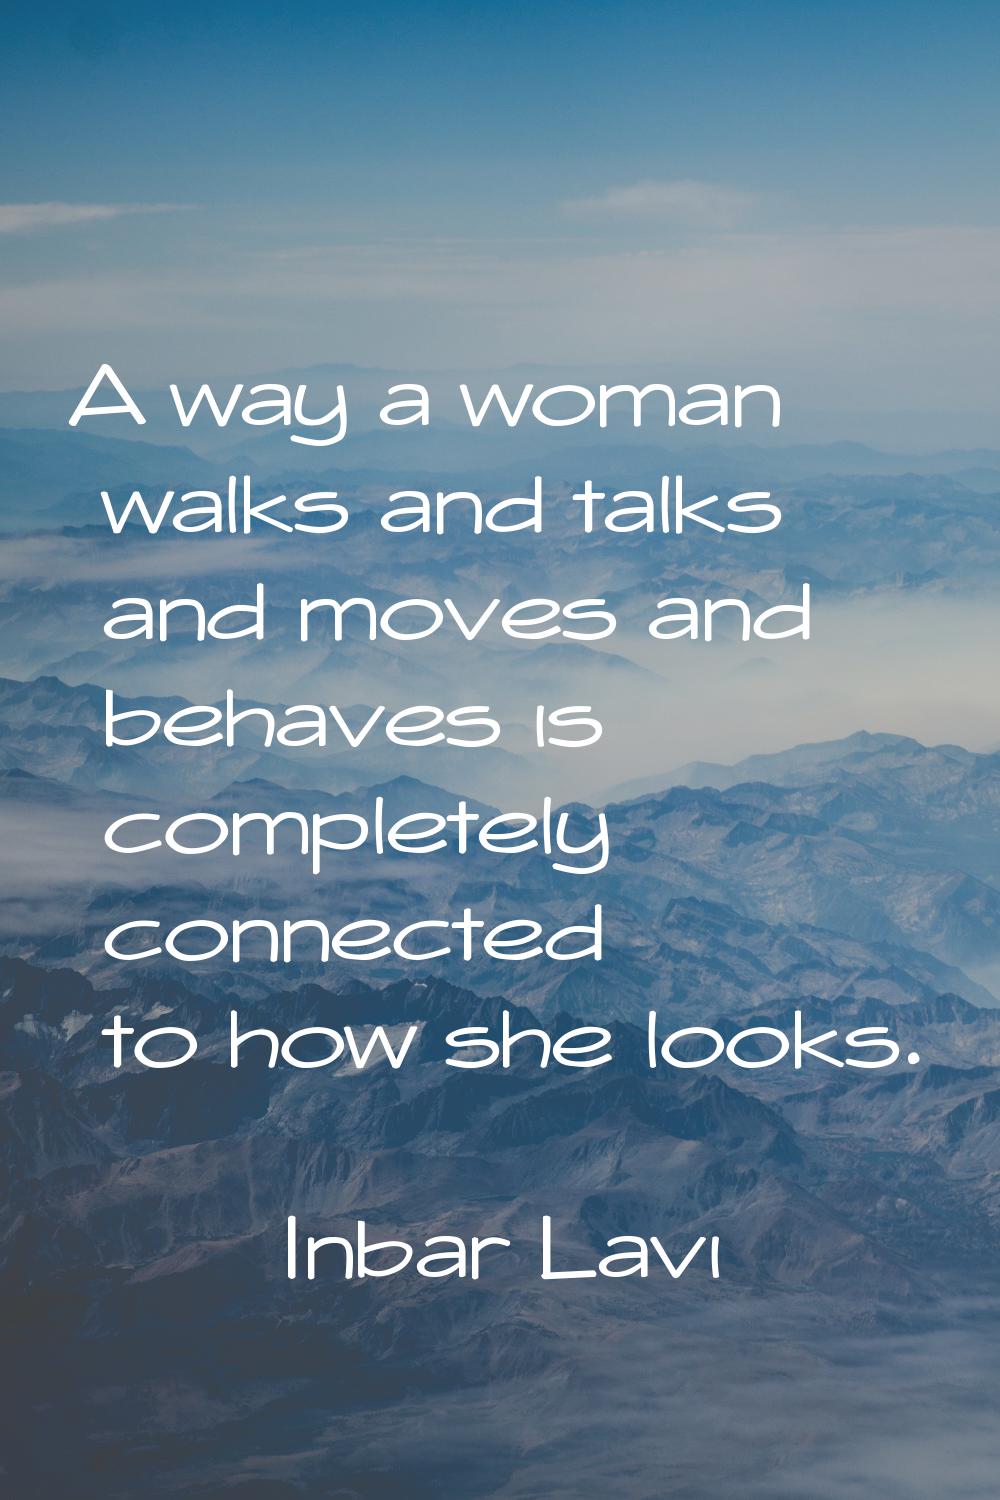 A way a woman walks and talks and moves and behaves is completely connected to how she looks.